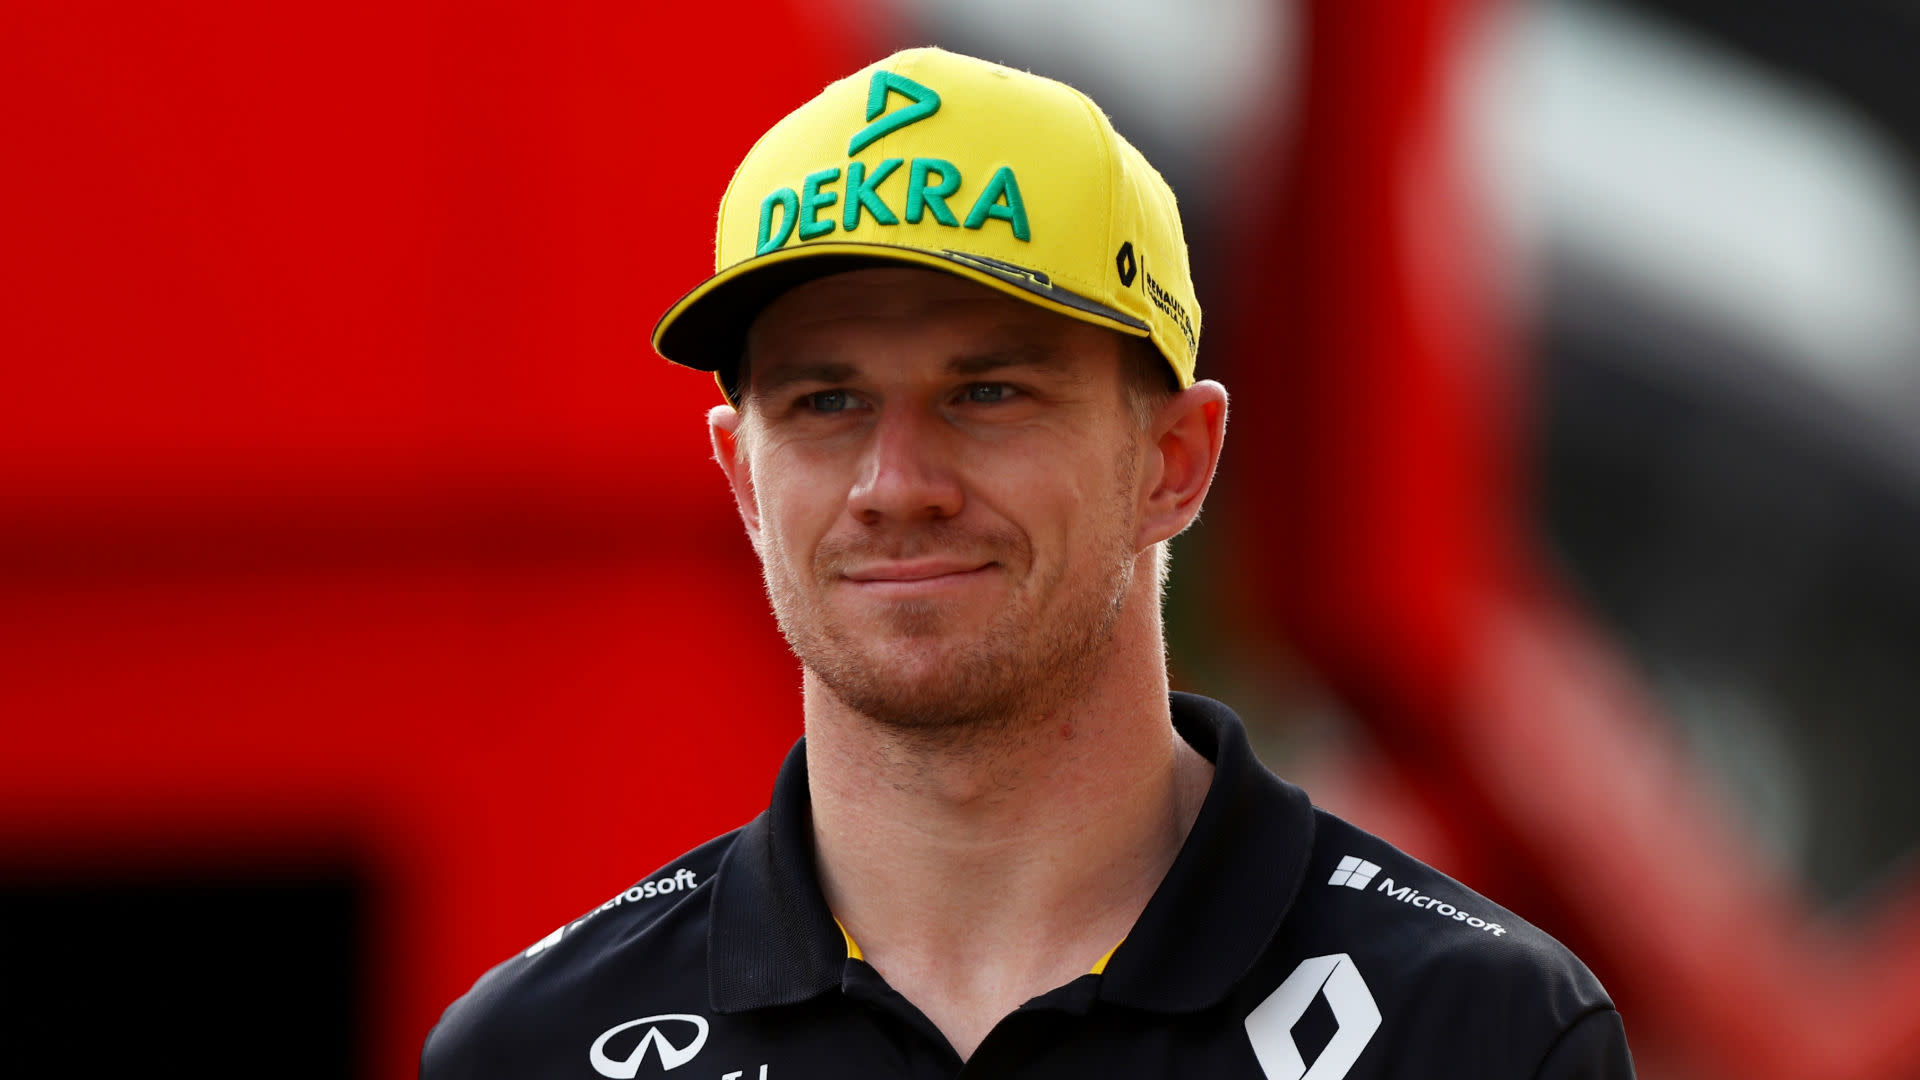 Hulkenberg replaces Perez at Racing Point for British Grand Prix - Yahoo Sports